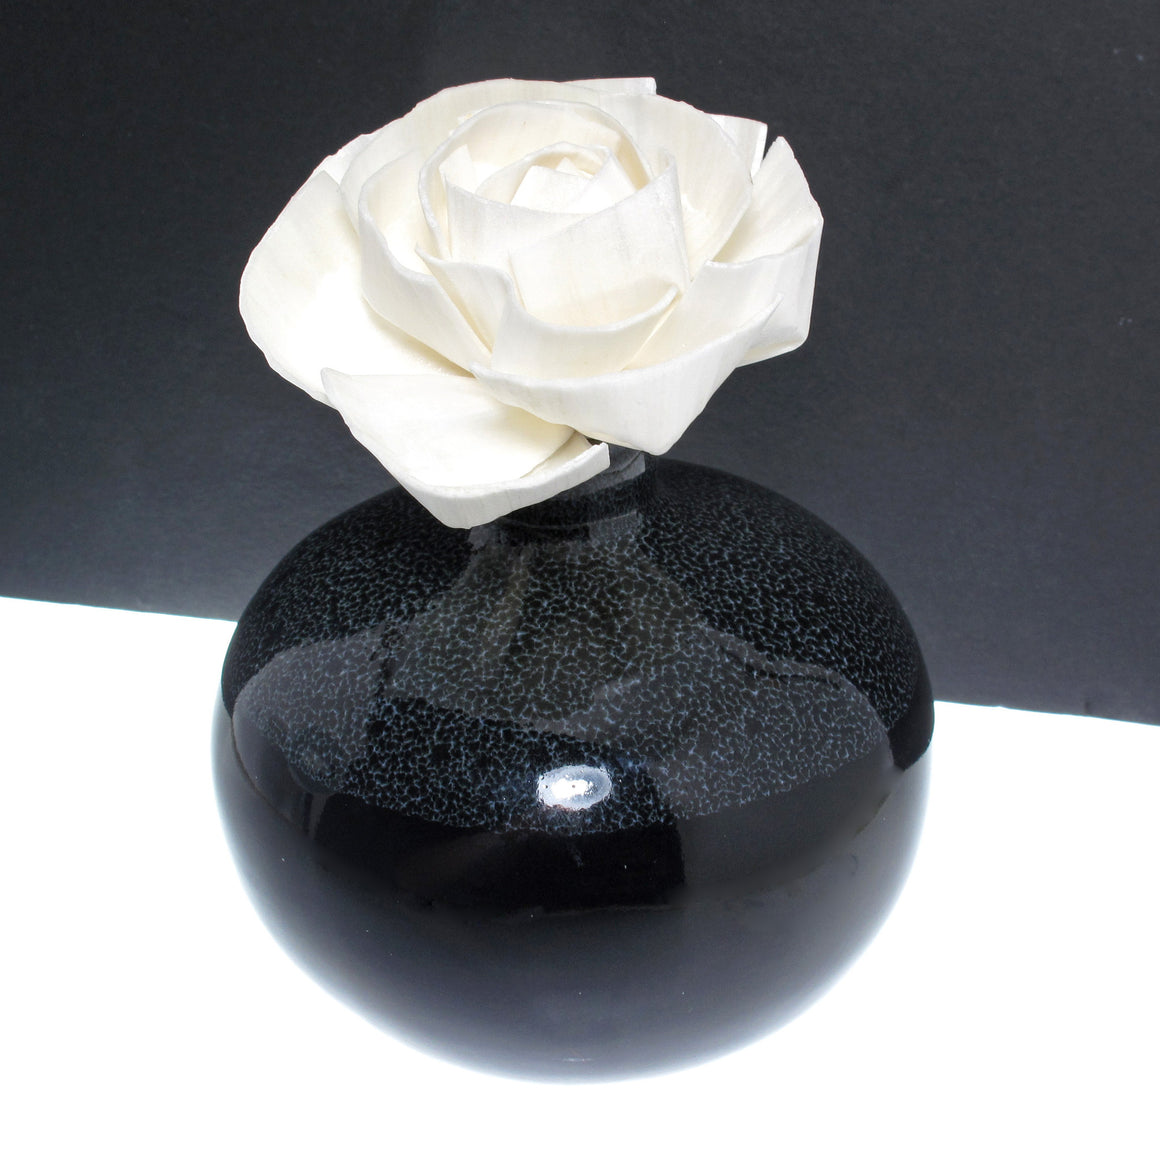 Sola Wood Flower Aroma Oil Diffuser with a Bendable Cotton Wire Wick, Peony - TropicaZona